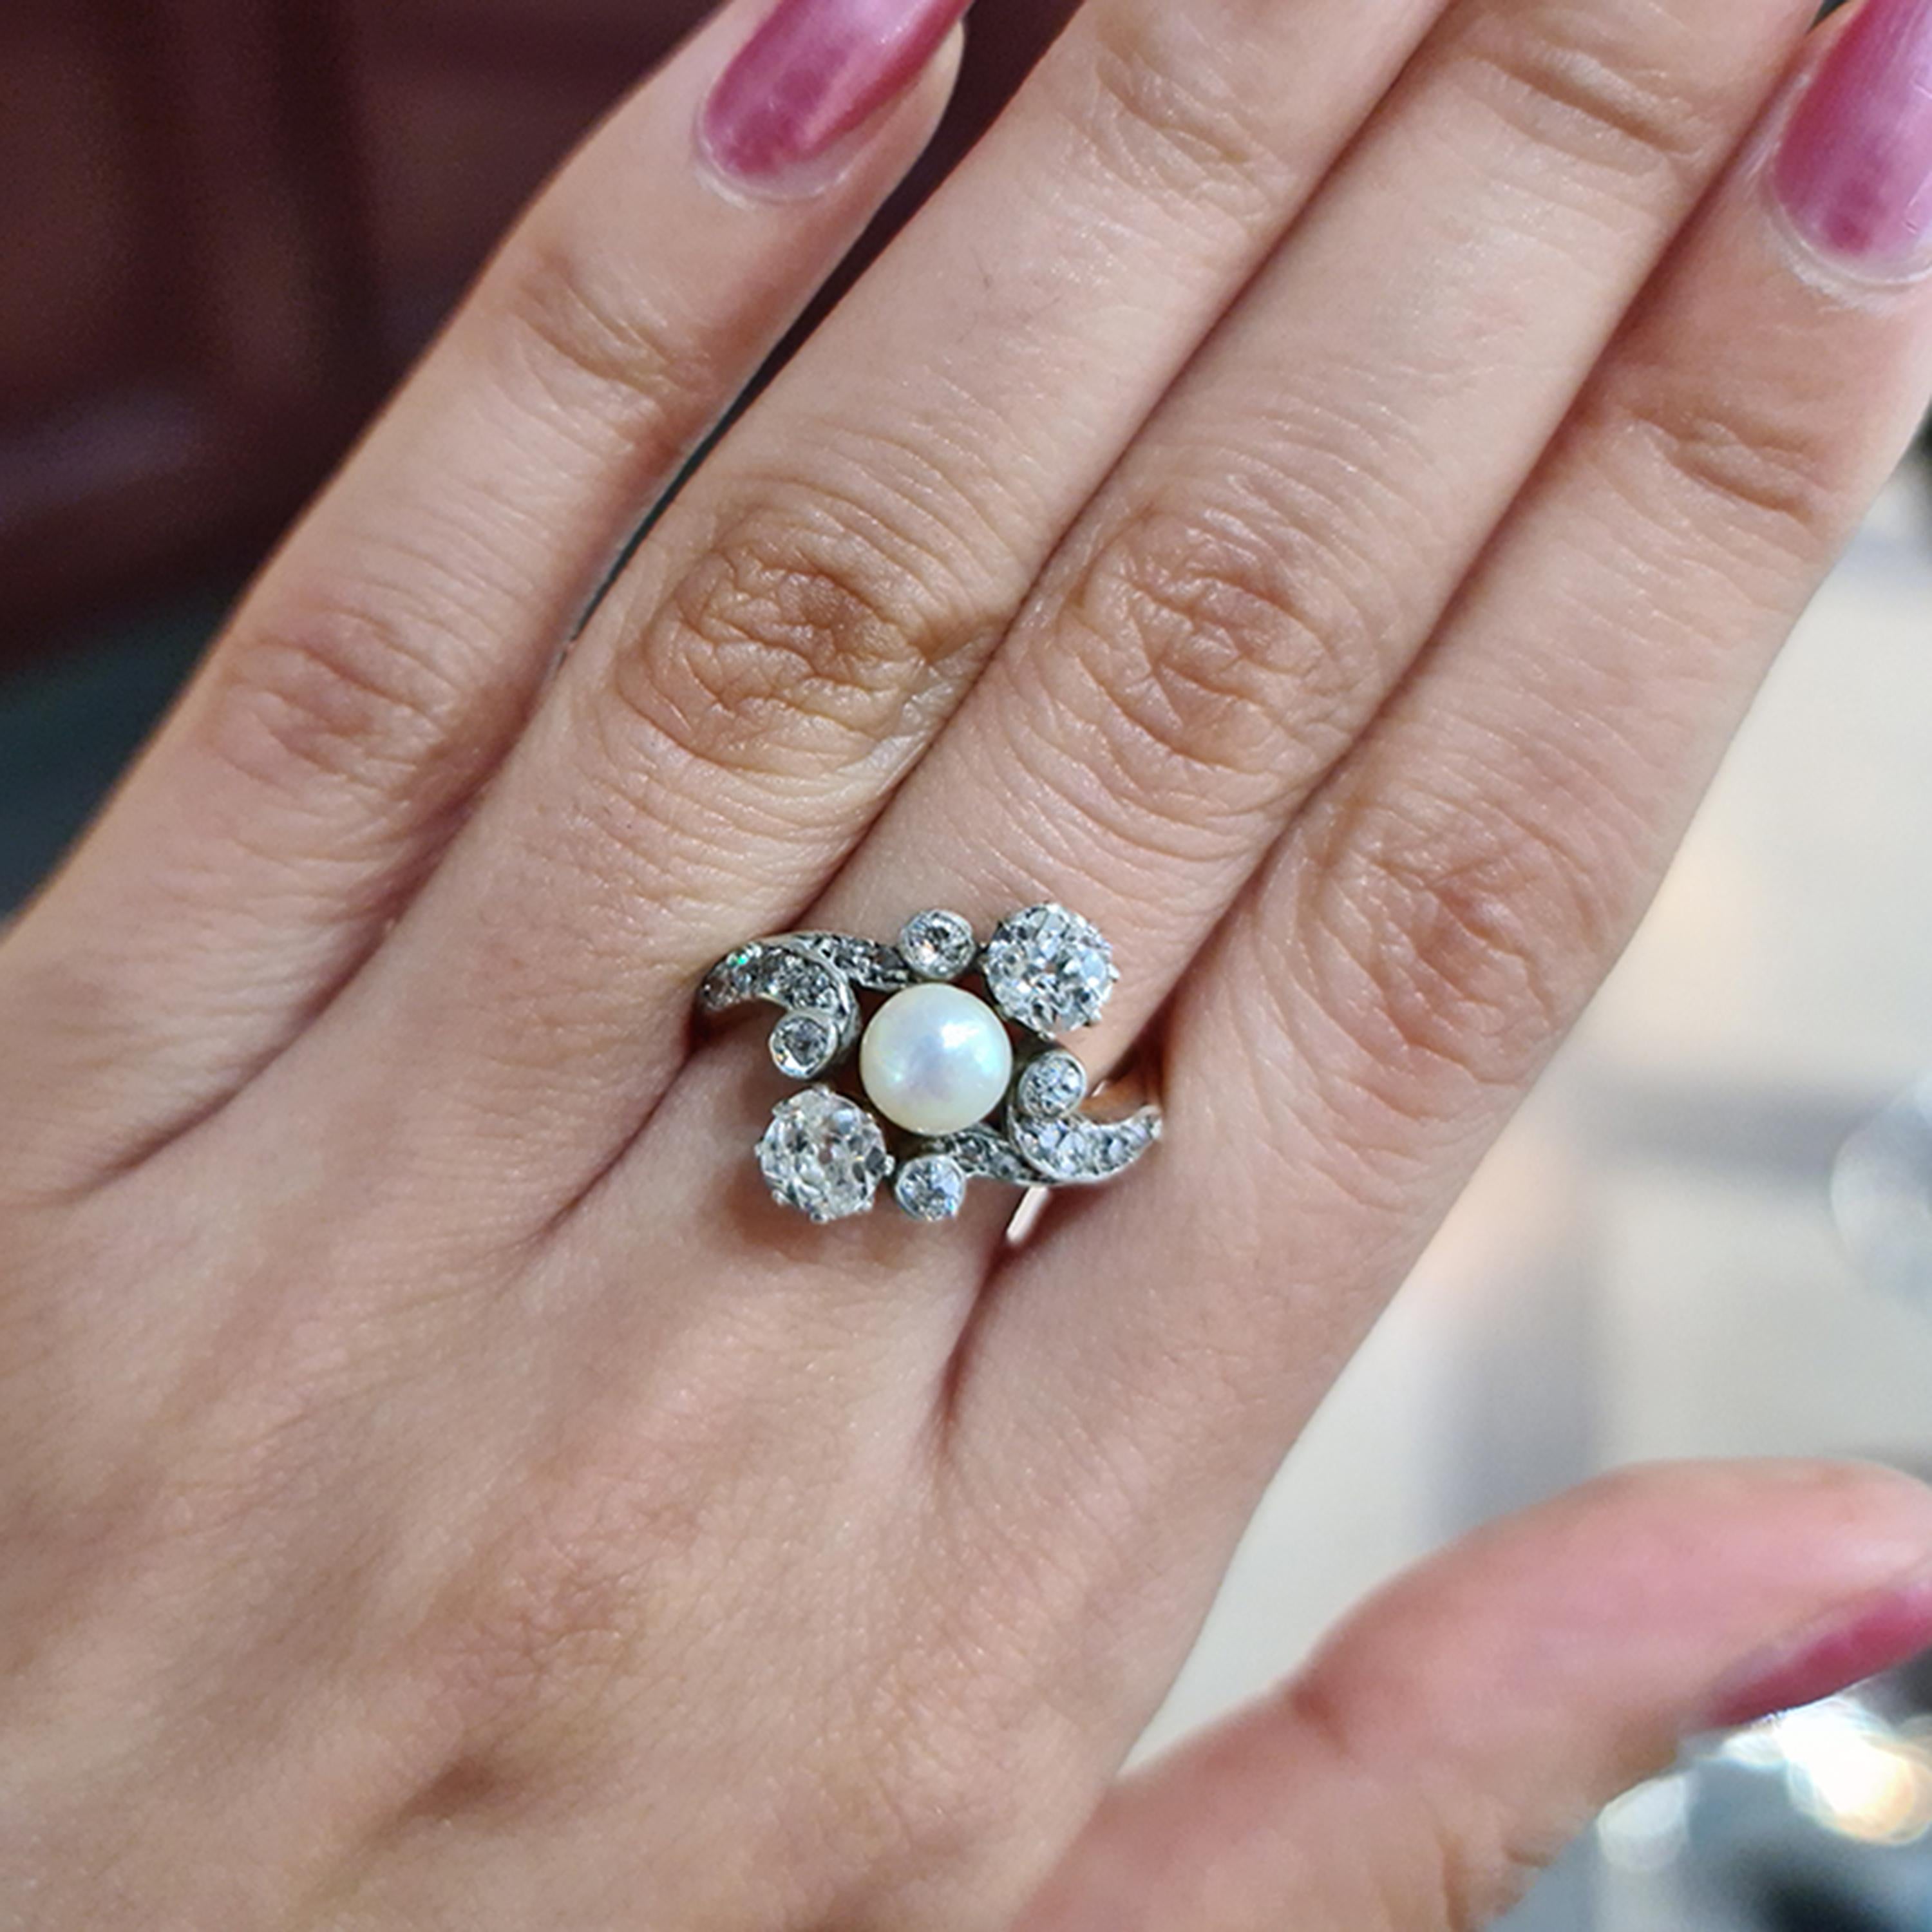 An early twentieth century pearl and diamond, three stone crossover ring, with an Art Nouveau influenced design, set with a natural pearl, between two old-cut diamonds, weighing approximately 1.10 carat in total, in eight claw crown settings, with